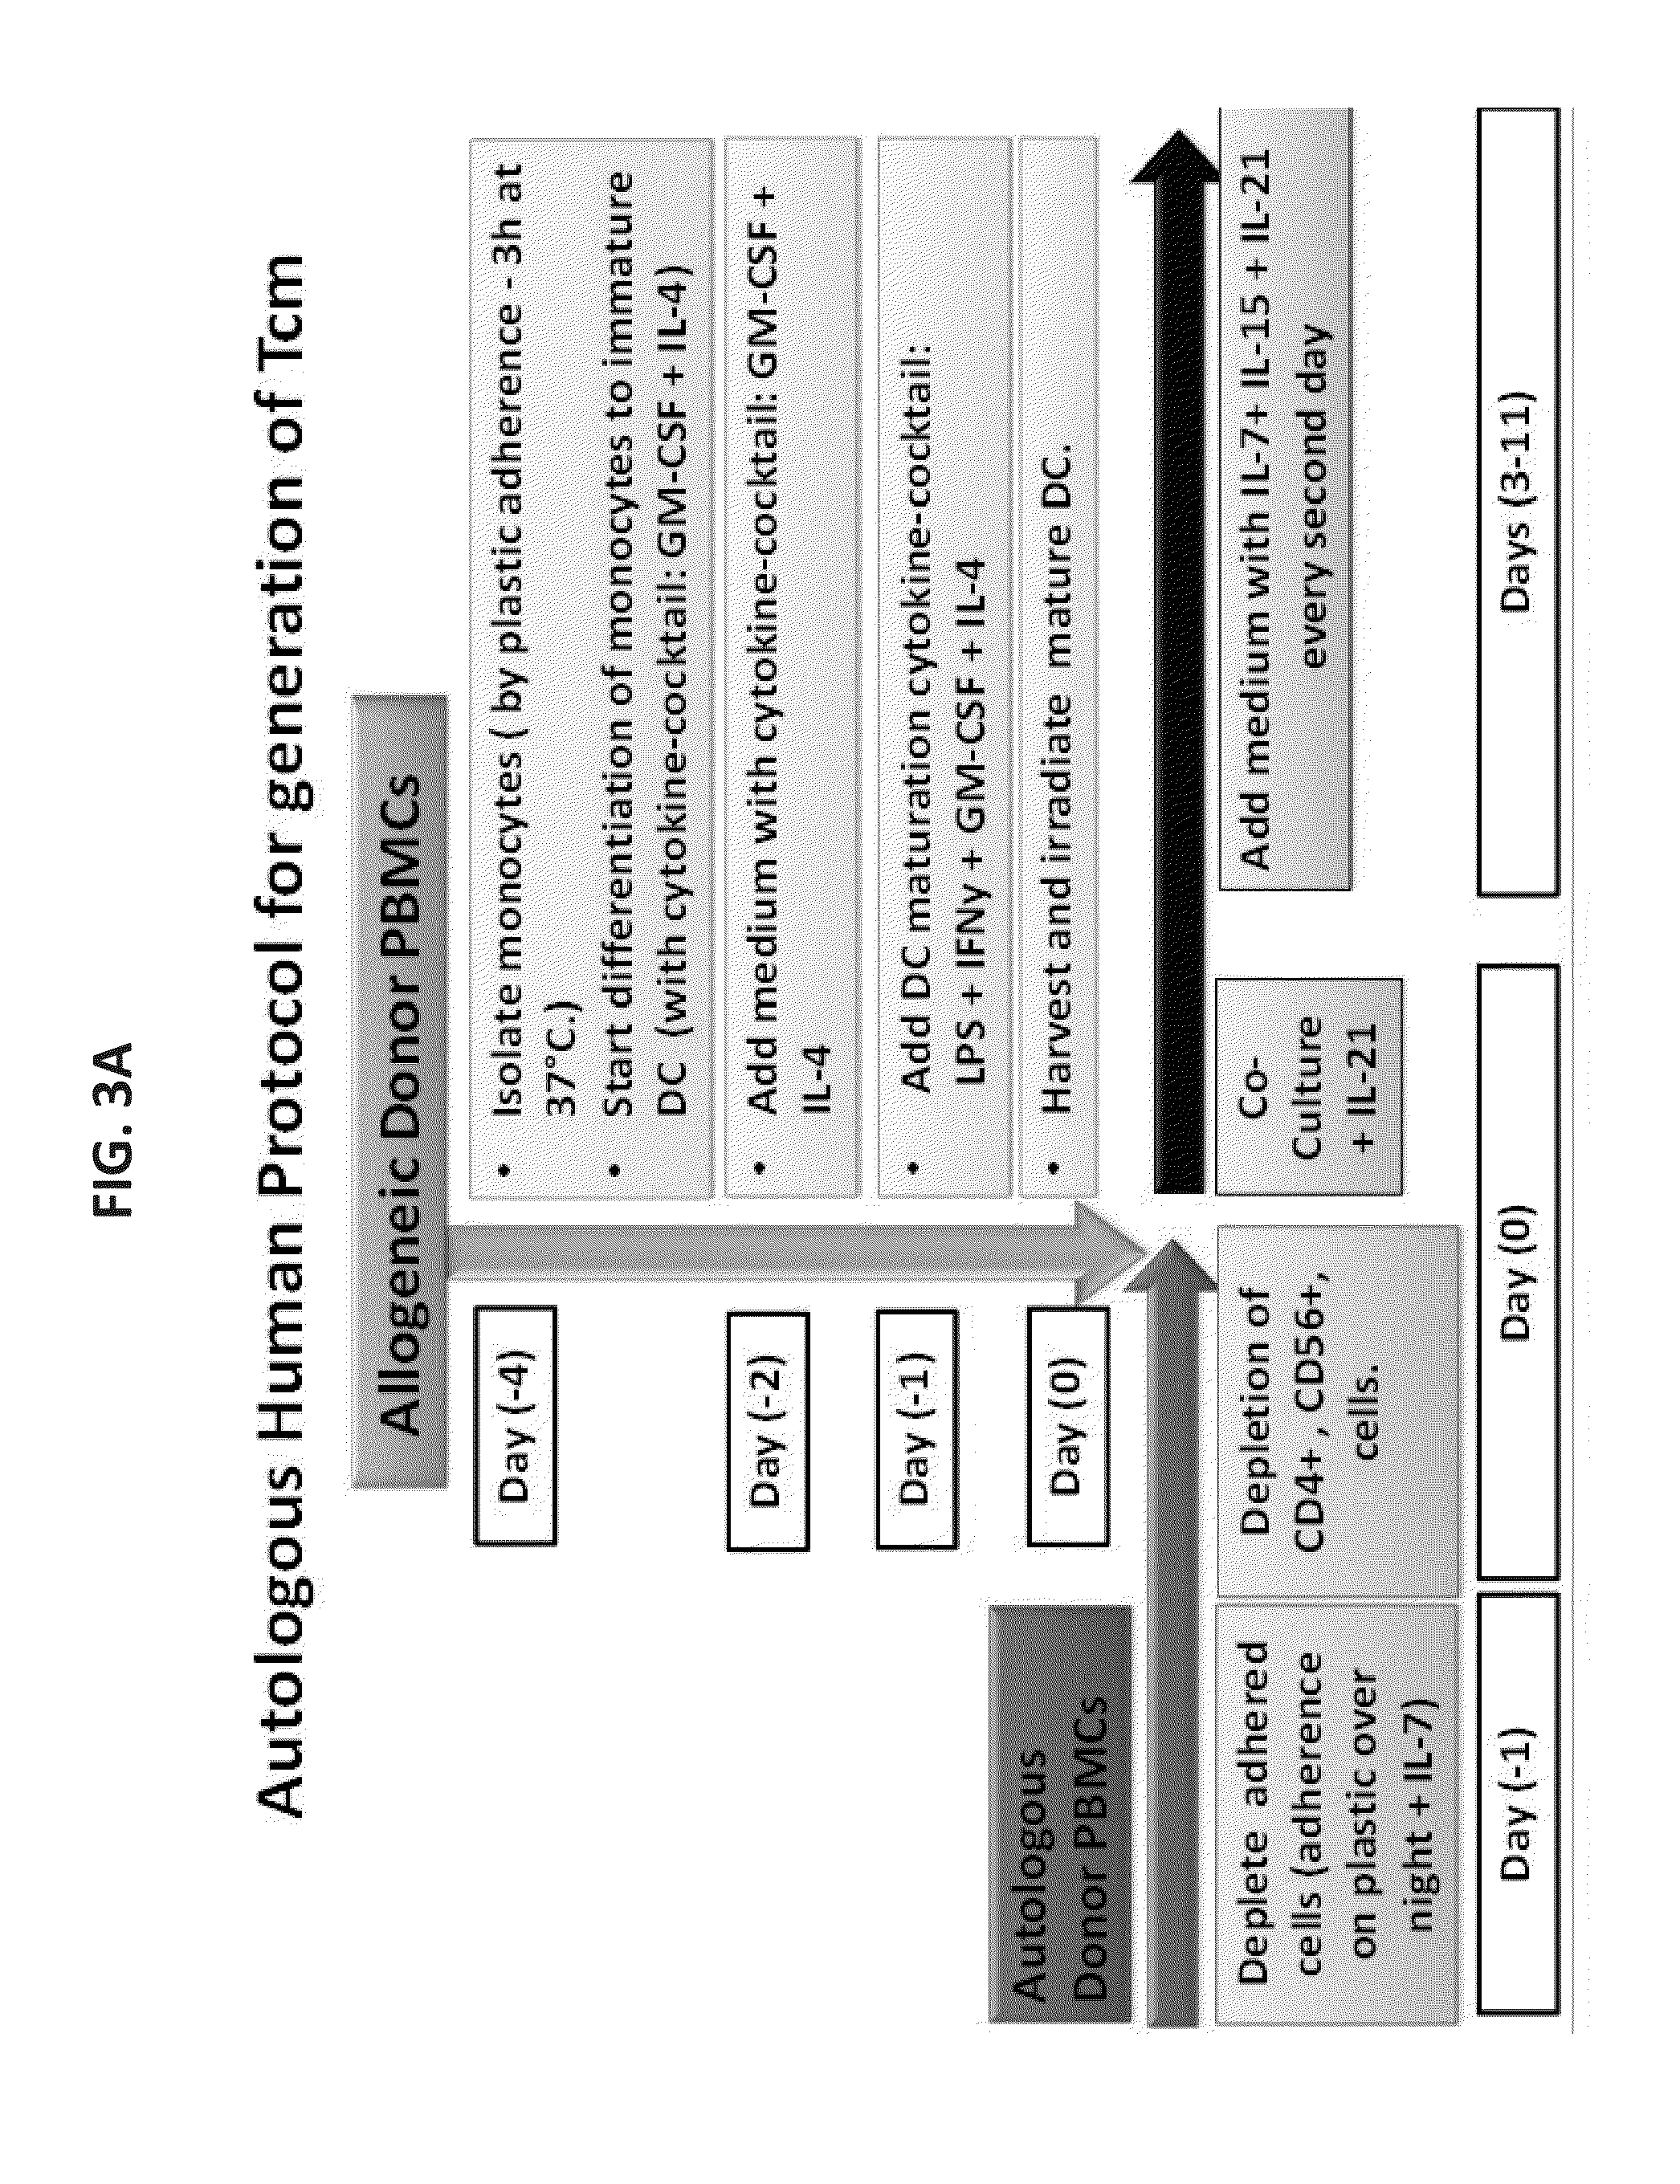 Anti third party central memory t cells, methods of producing same and use of same in transplantation and disease treatment